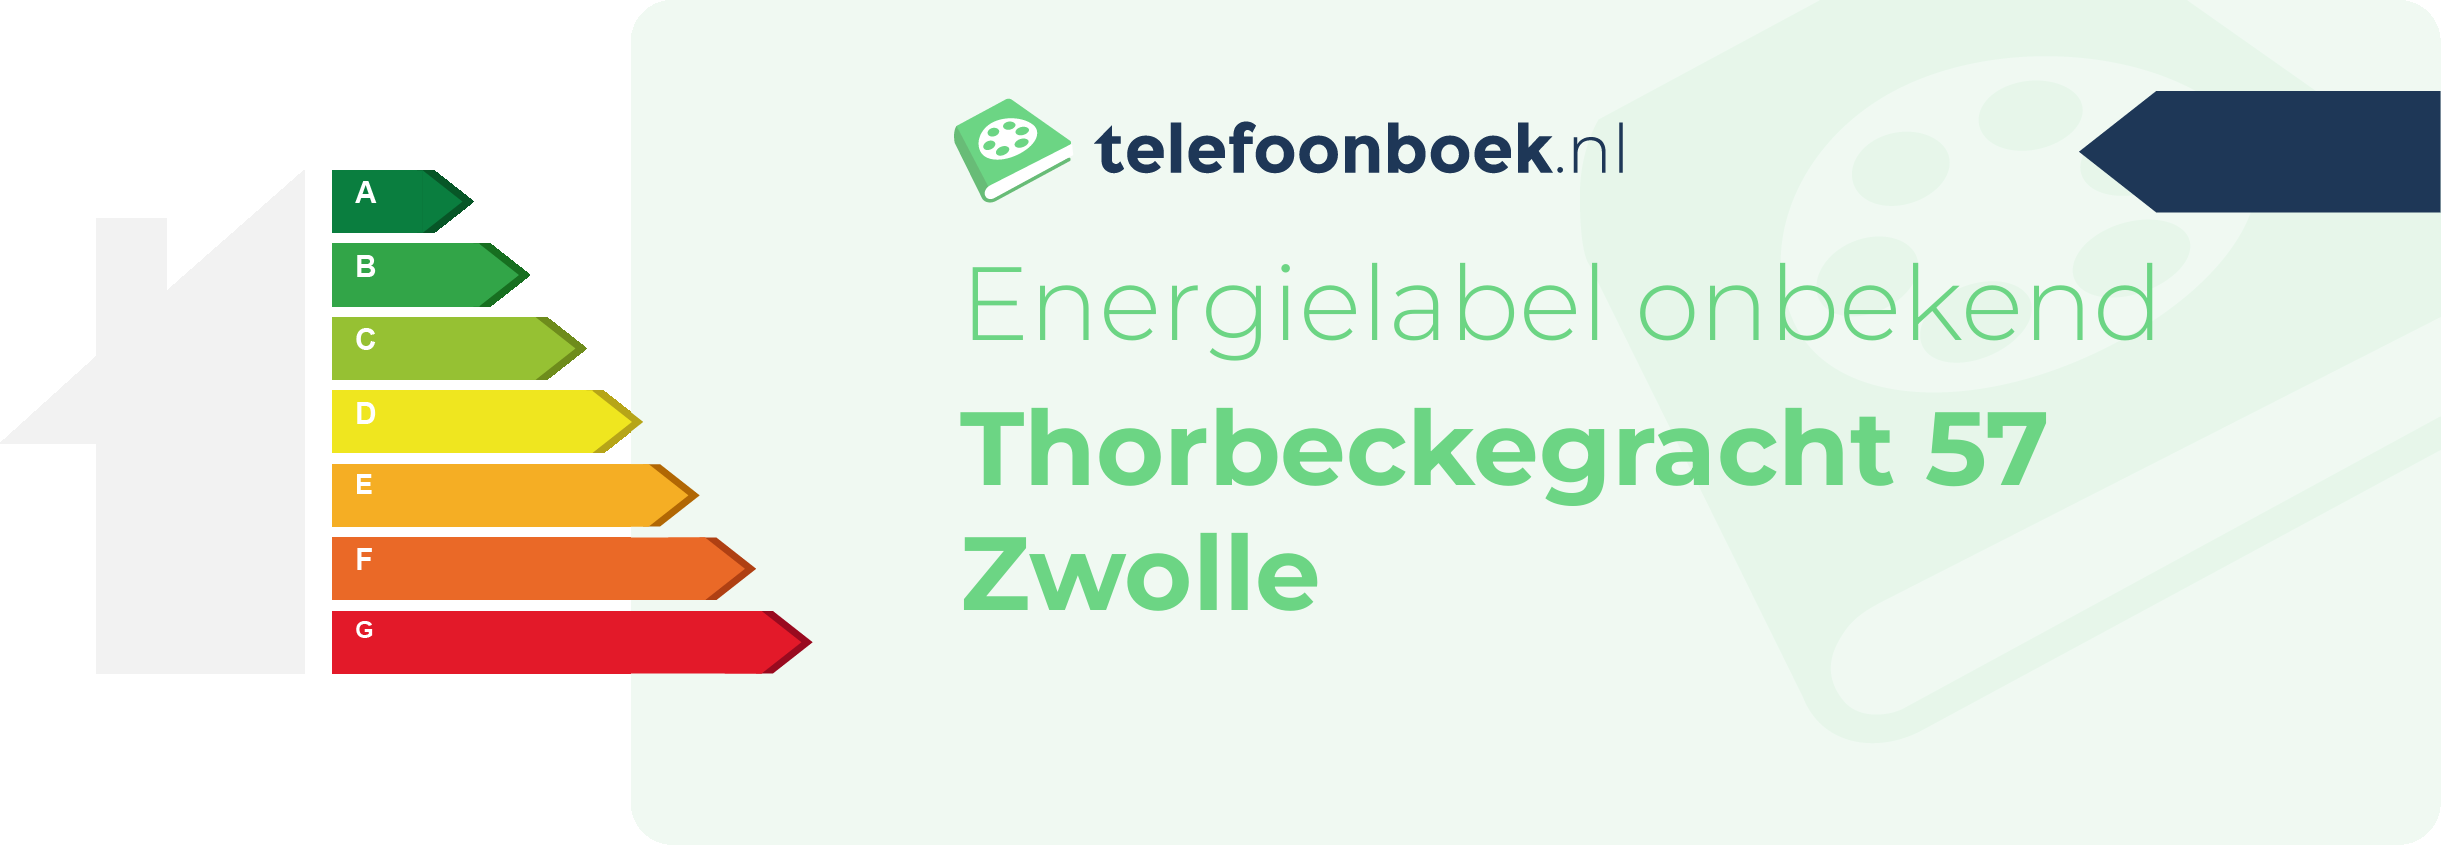 Energielabel Thorbeckegracht 57 Zwolle